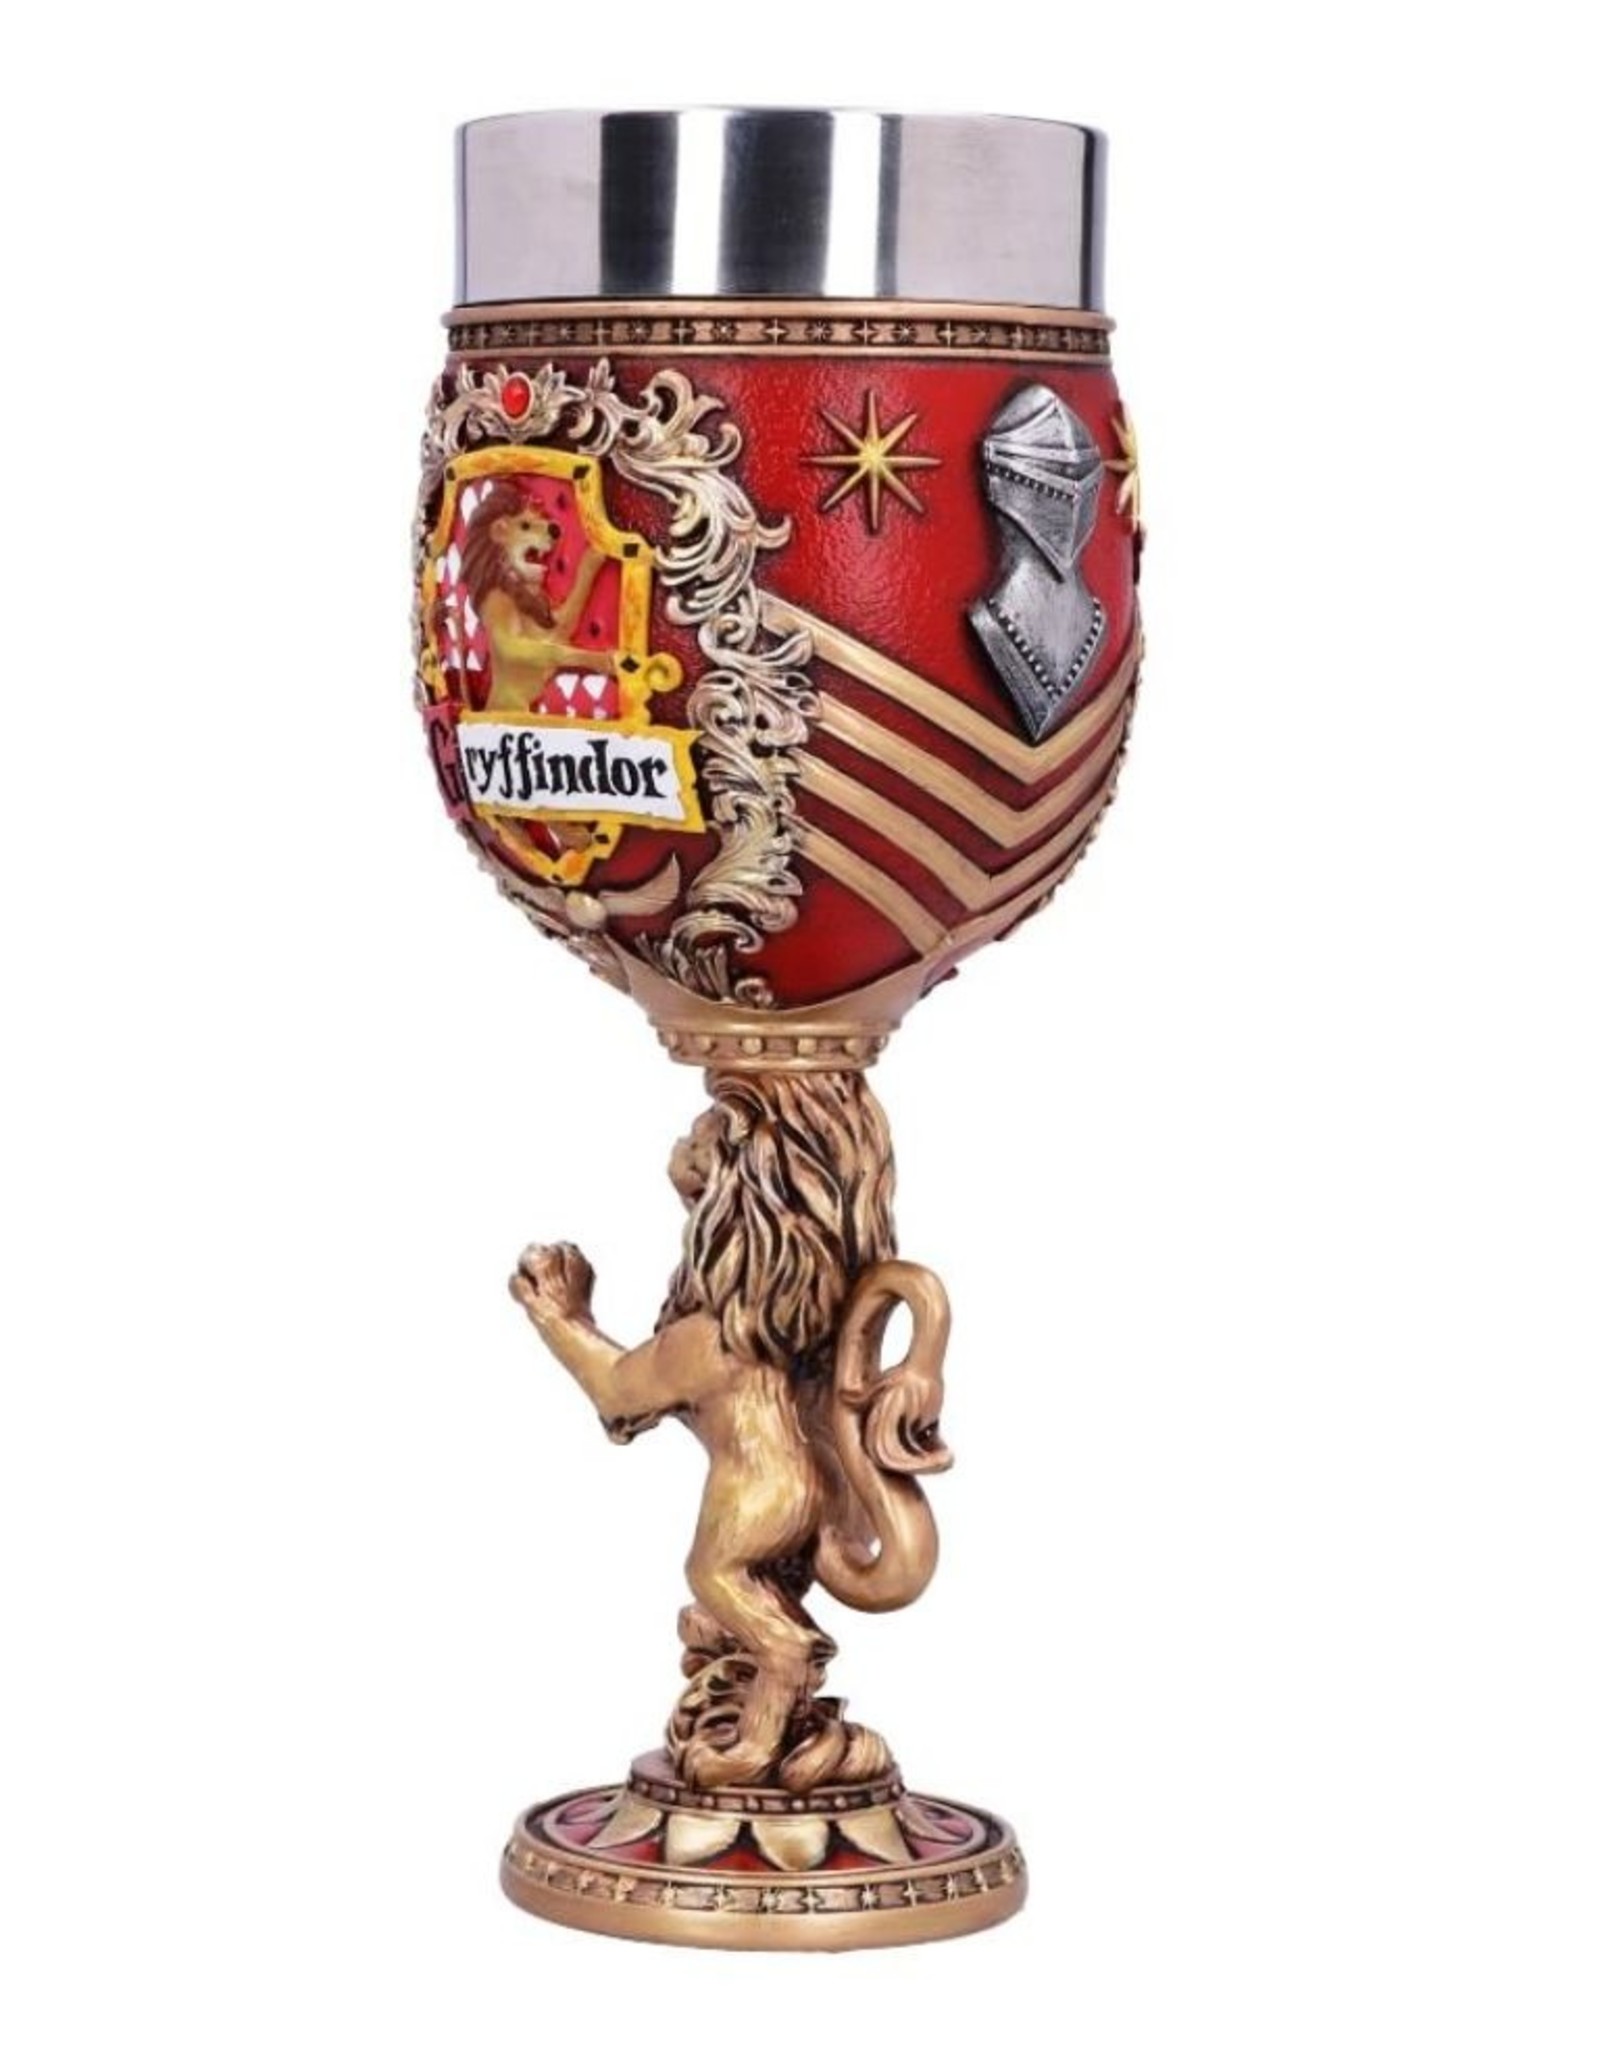 NemesisNow Giftware & Lifestyle - Harry Potter Gryffindor Collectible Goblet